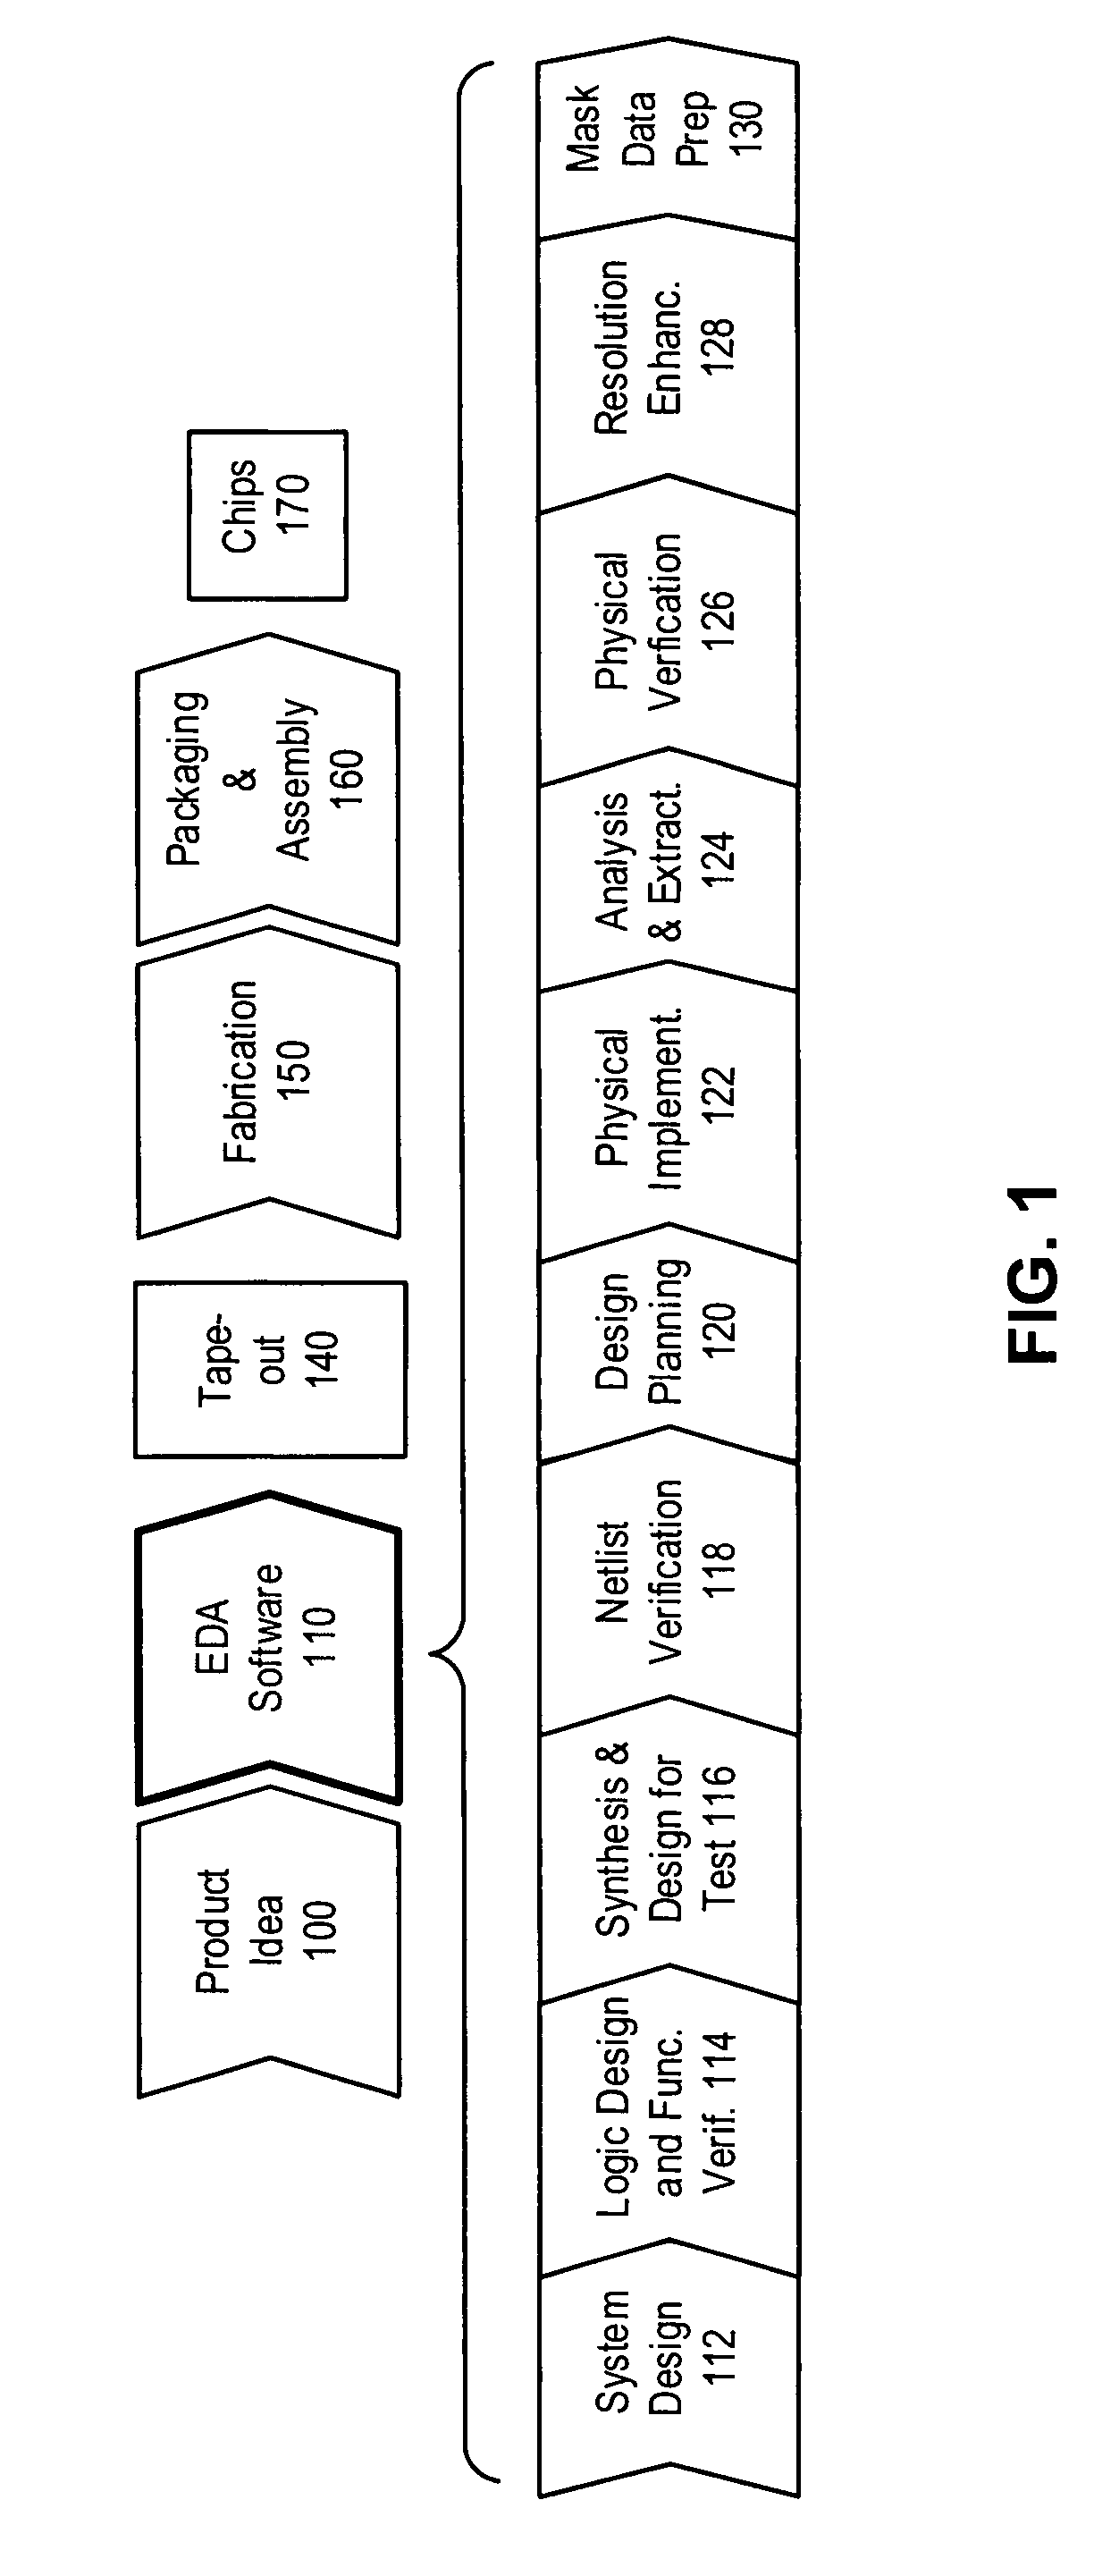 Method and apparatus to determine if a pattern is robustly manufacturable